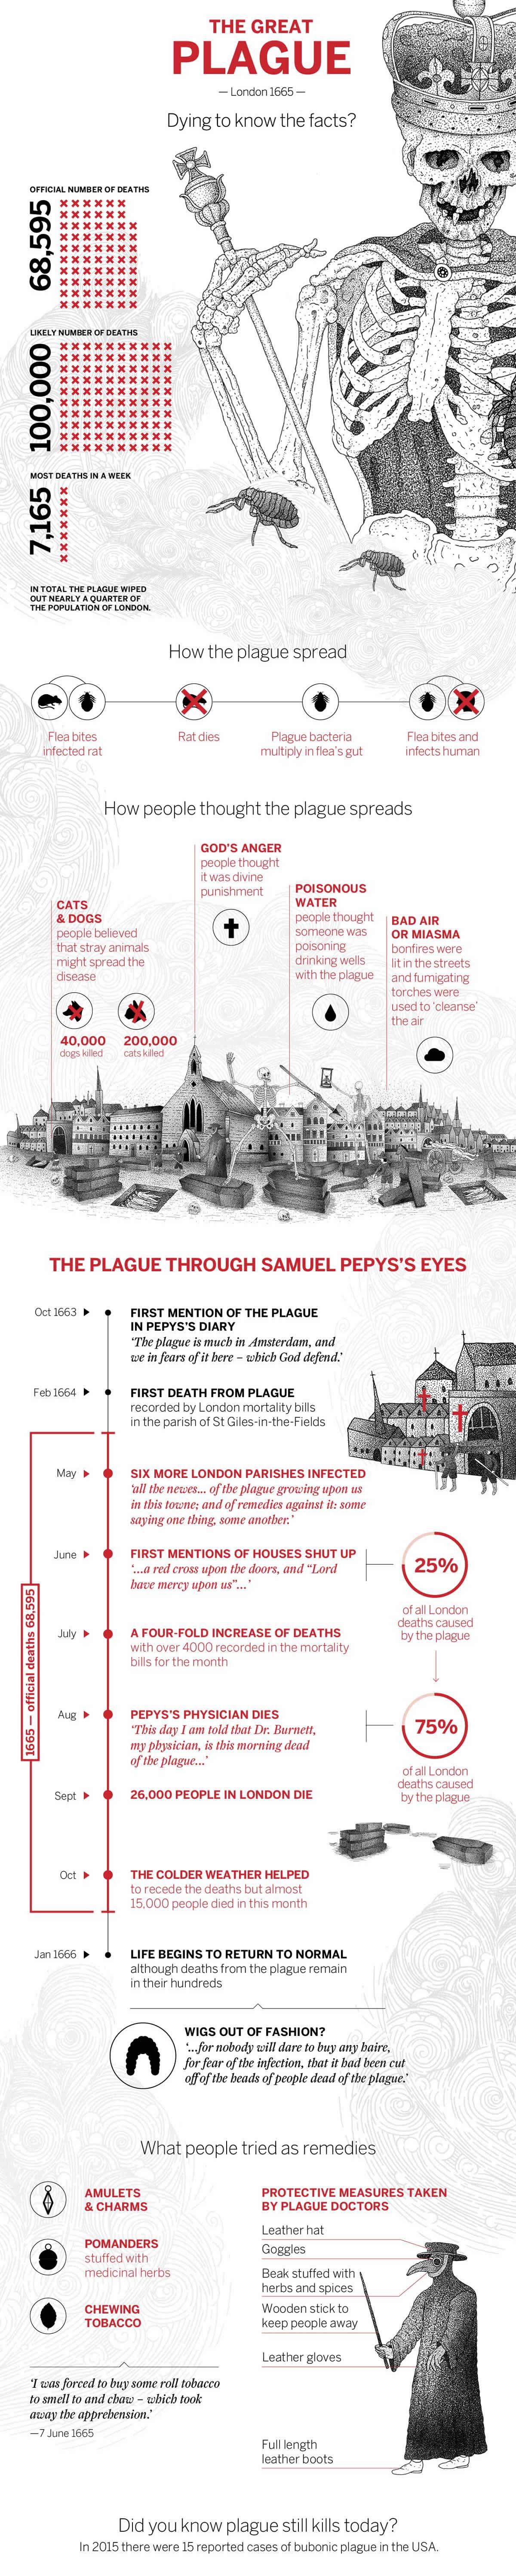 The Great Plague infographic